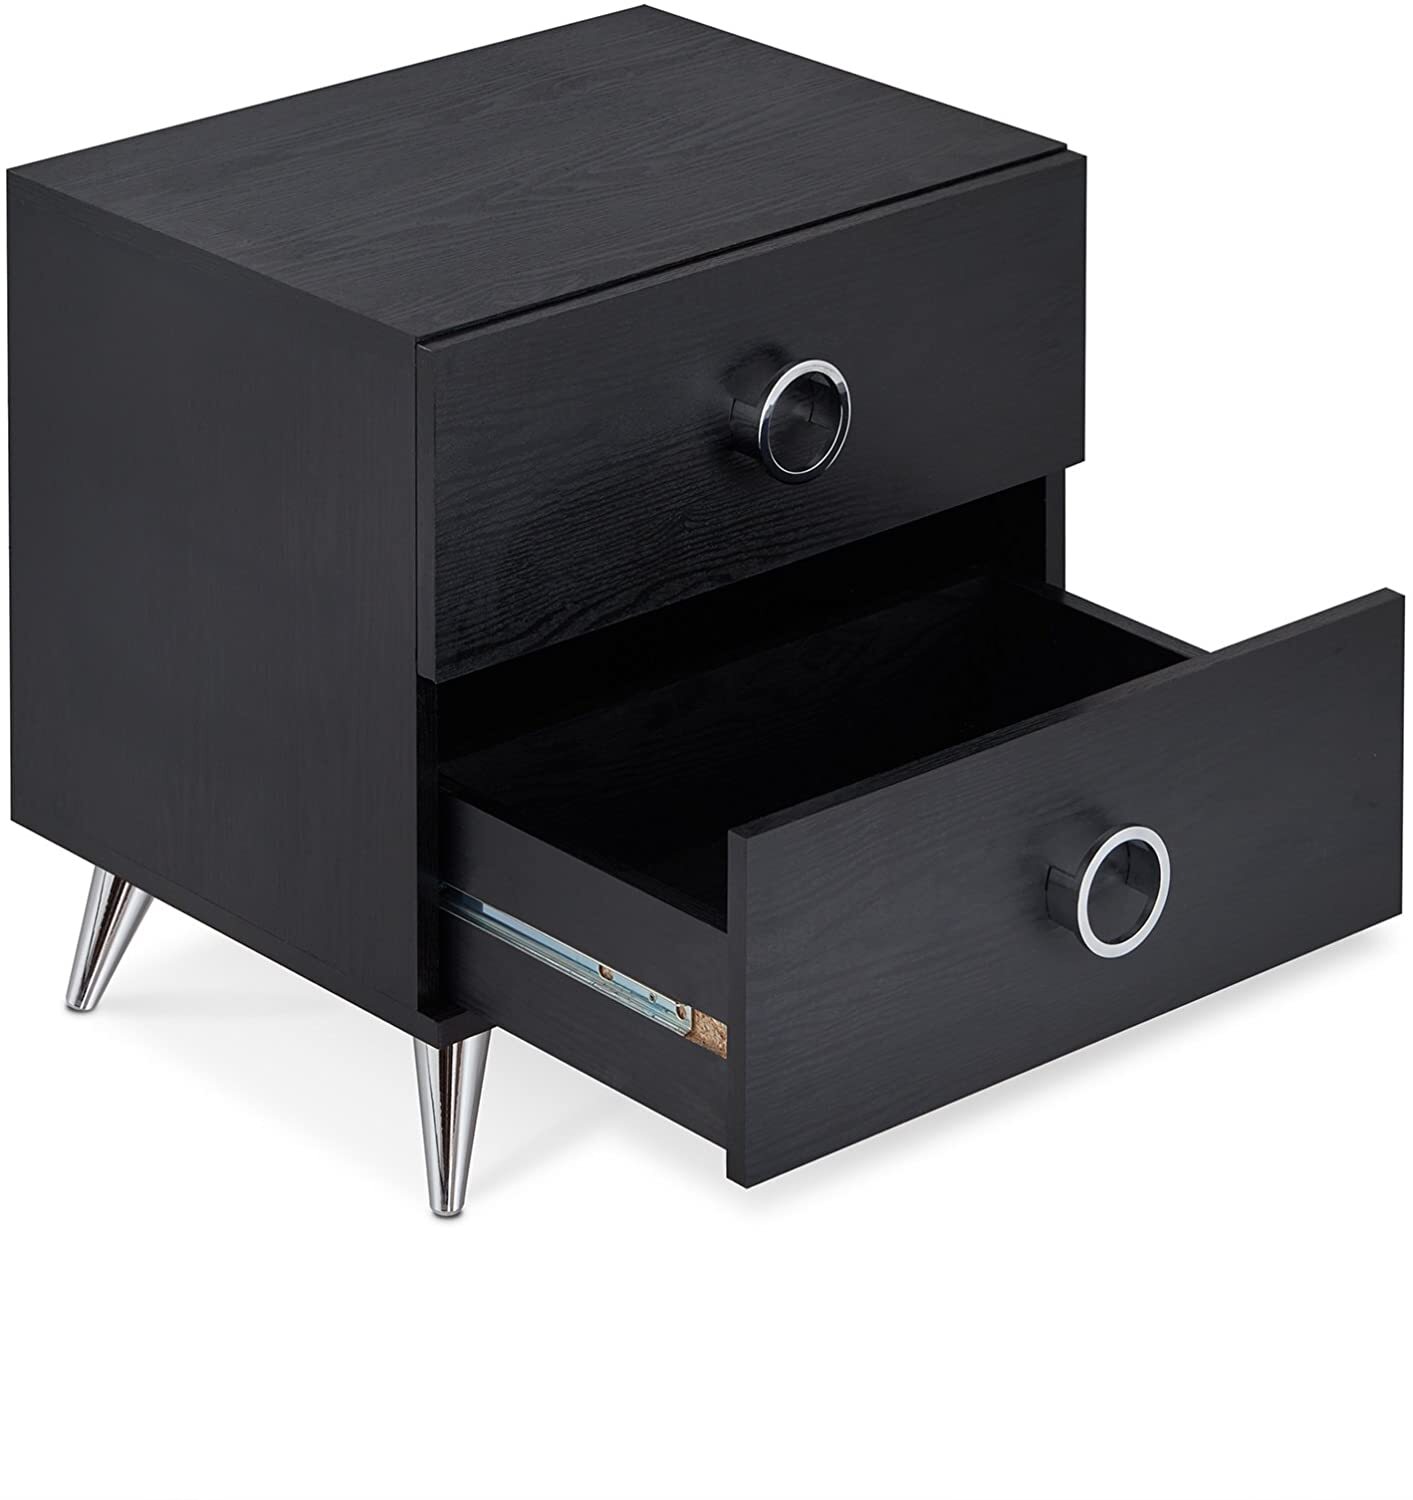 19.69" X 16.61" X 19.76" Black Particle Board Nightstand